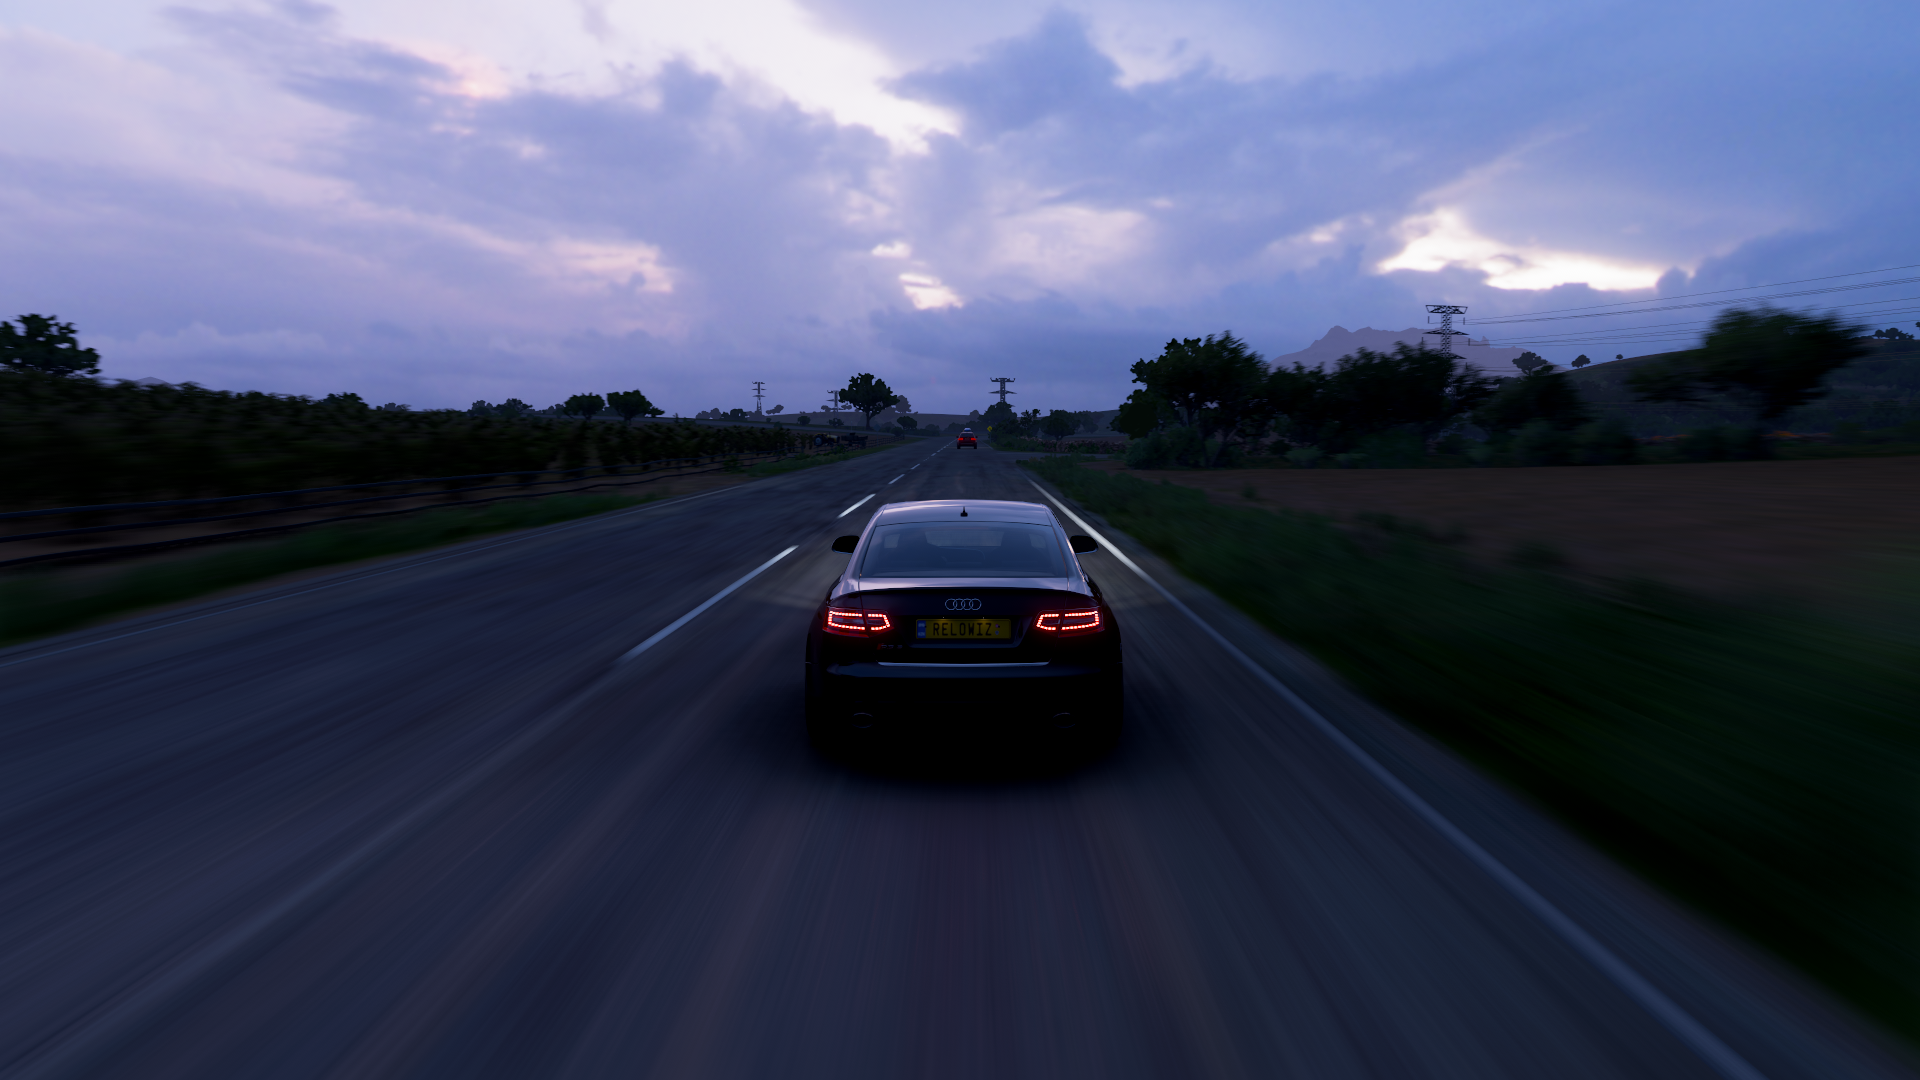 General 1920x1080 Forza Forza Horizon 5 Audi Audi RS6 car video games road CGI taillights clouds rear view sky